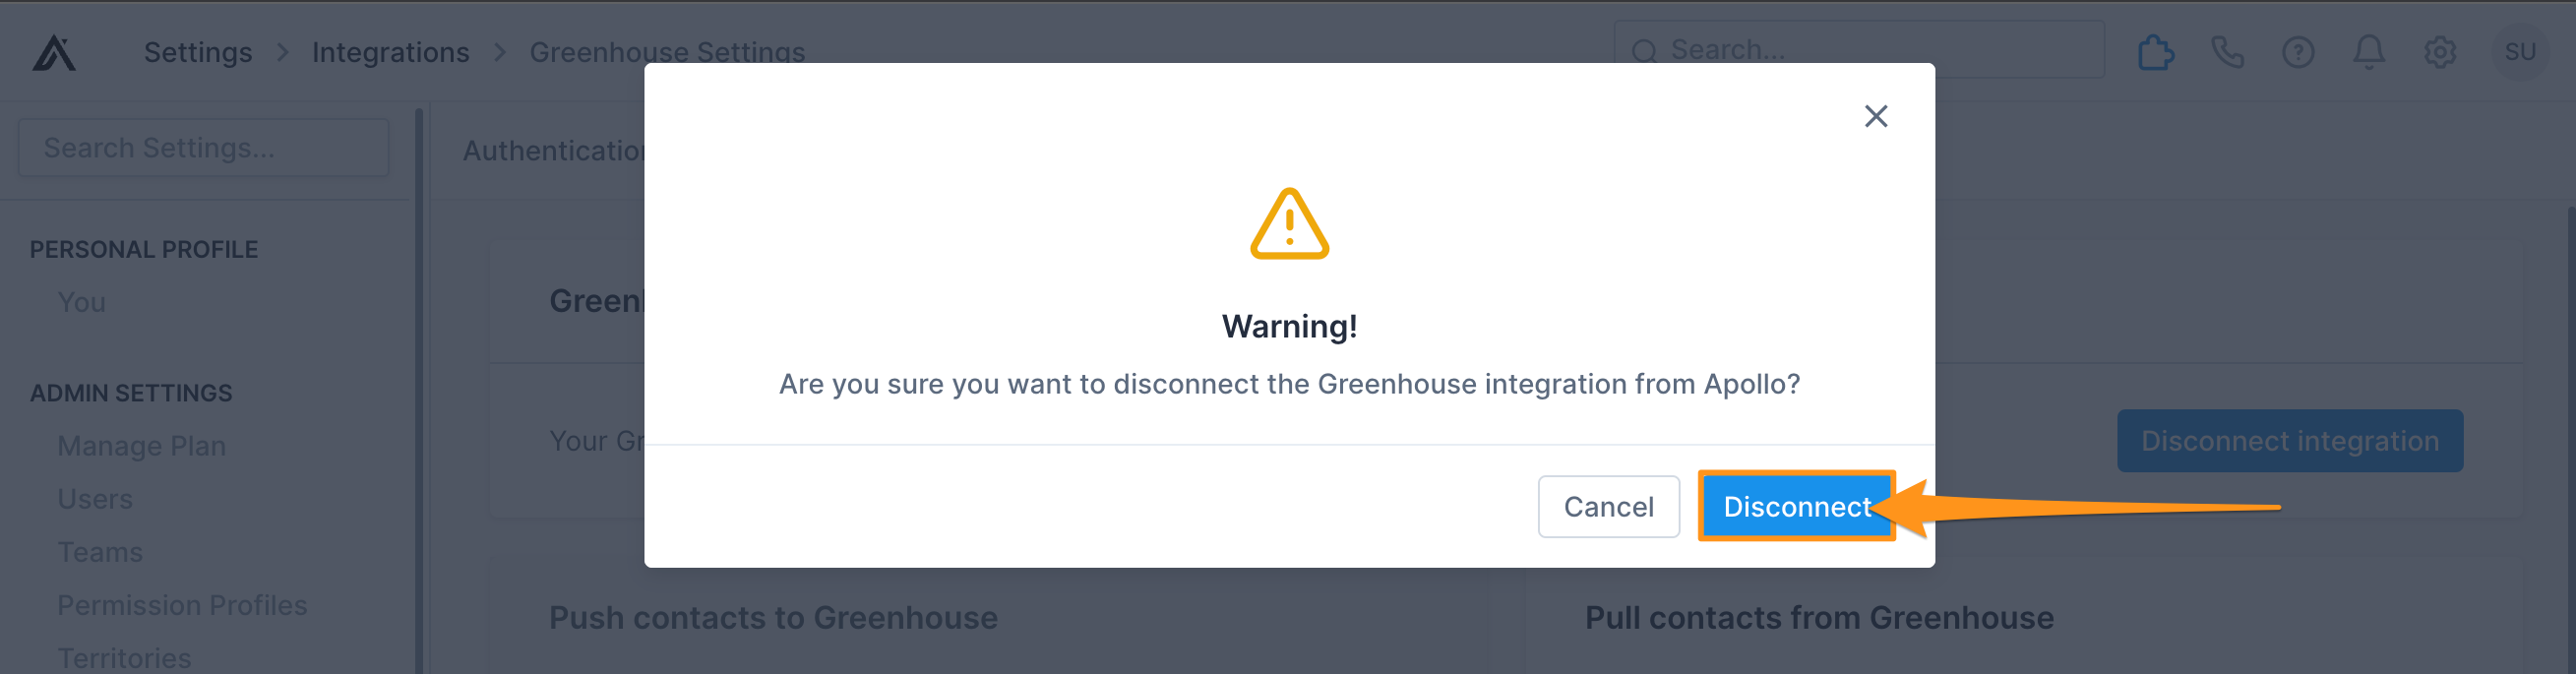 Disconnect button in warning modal